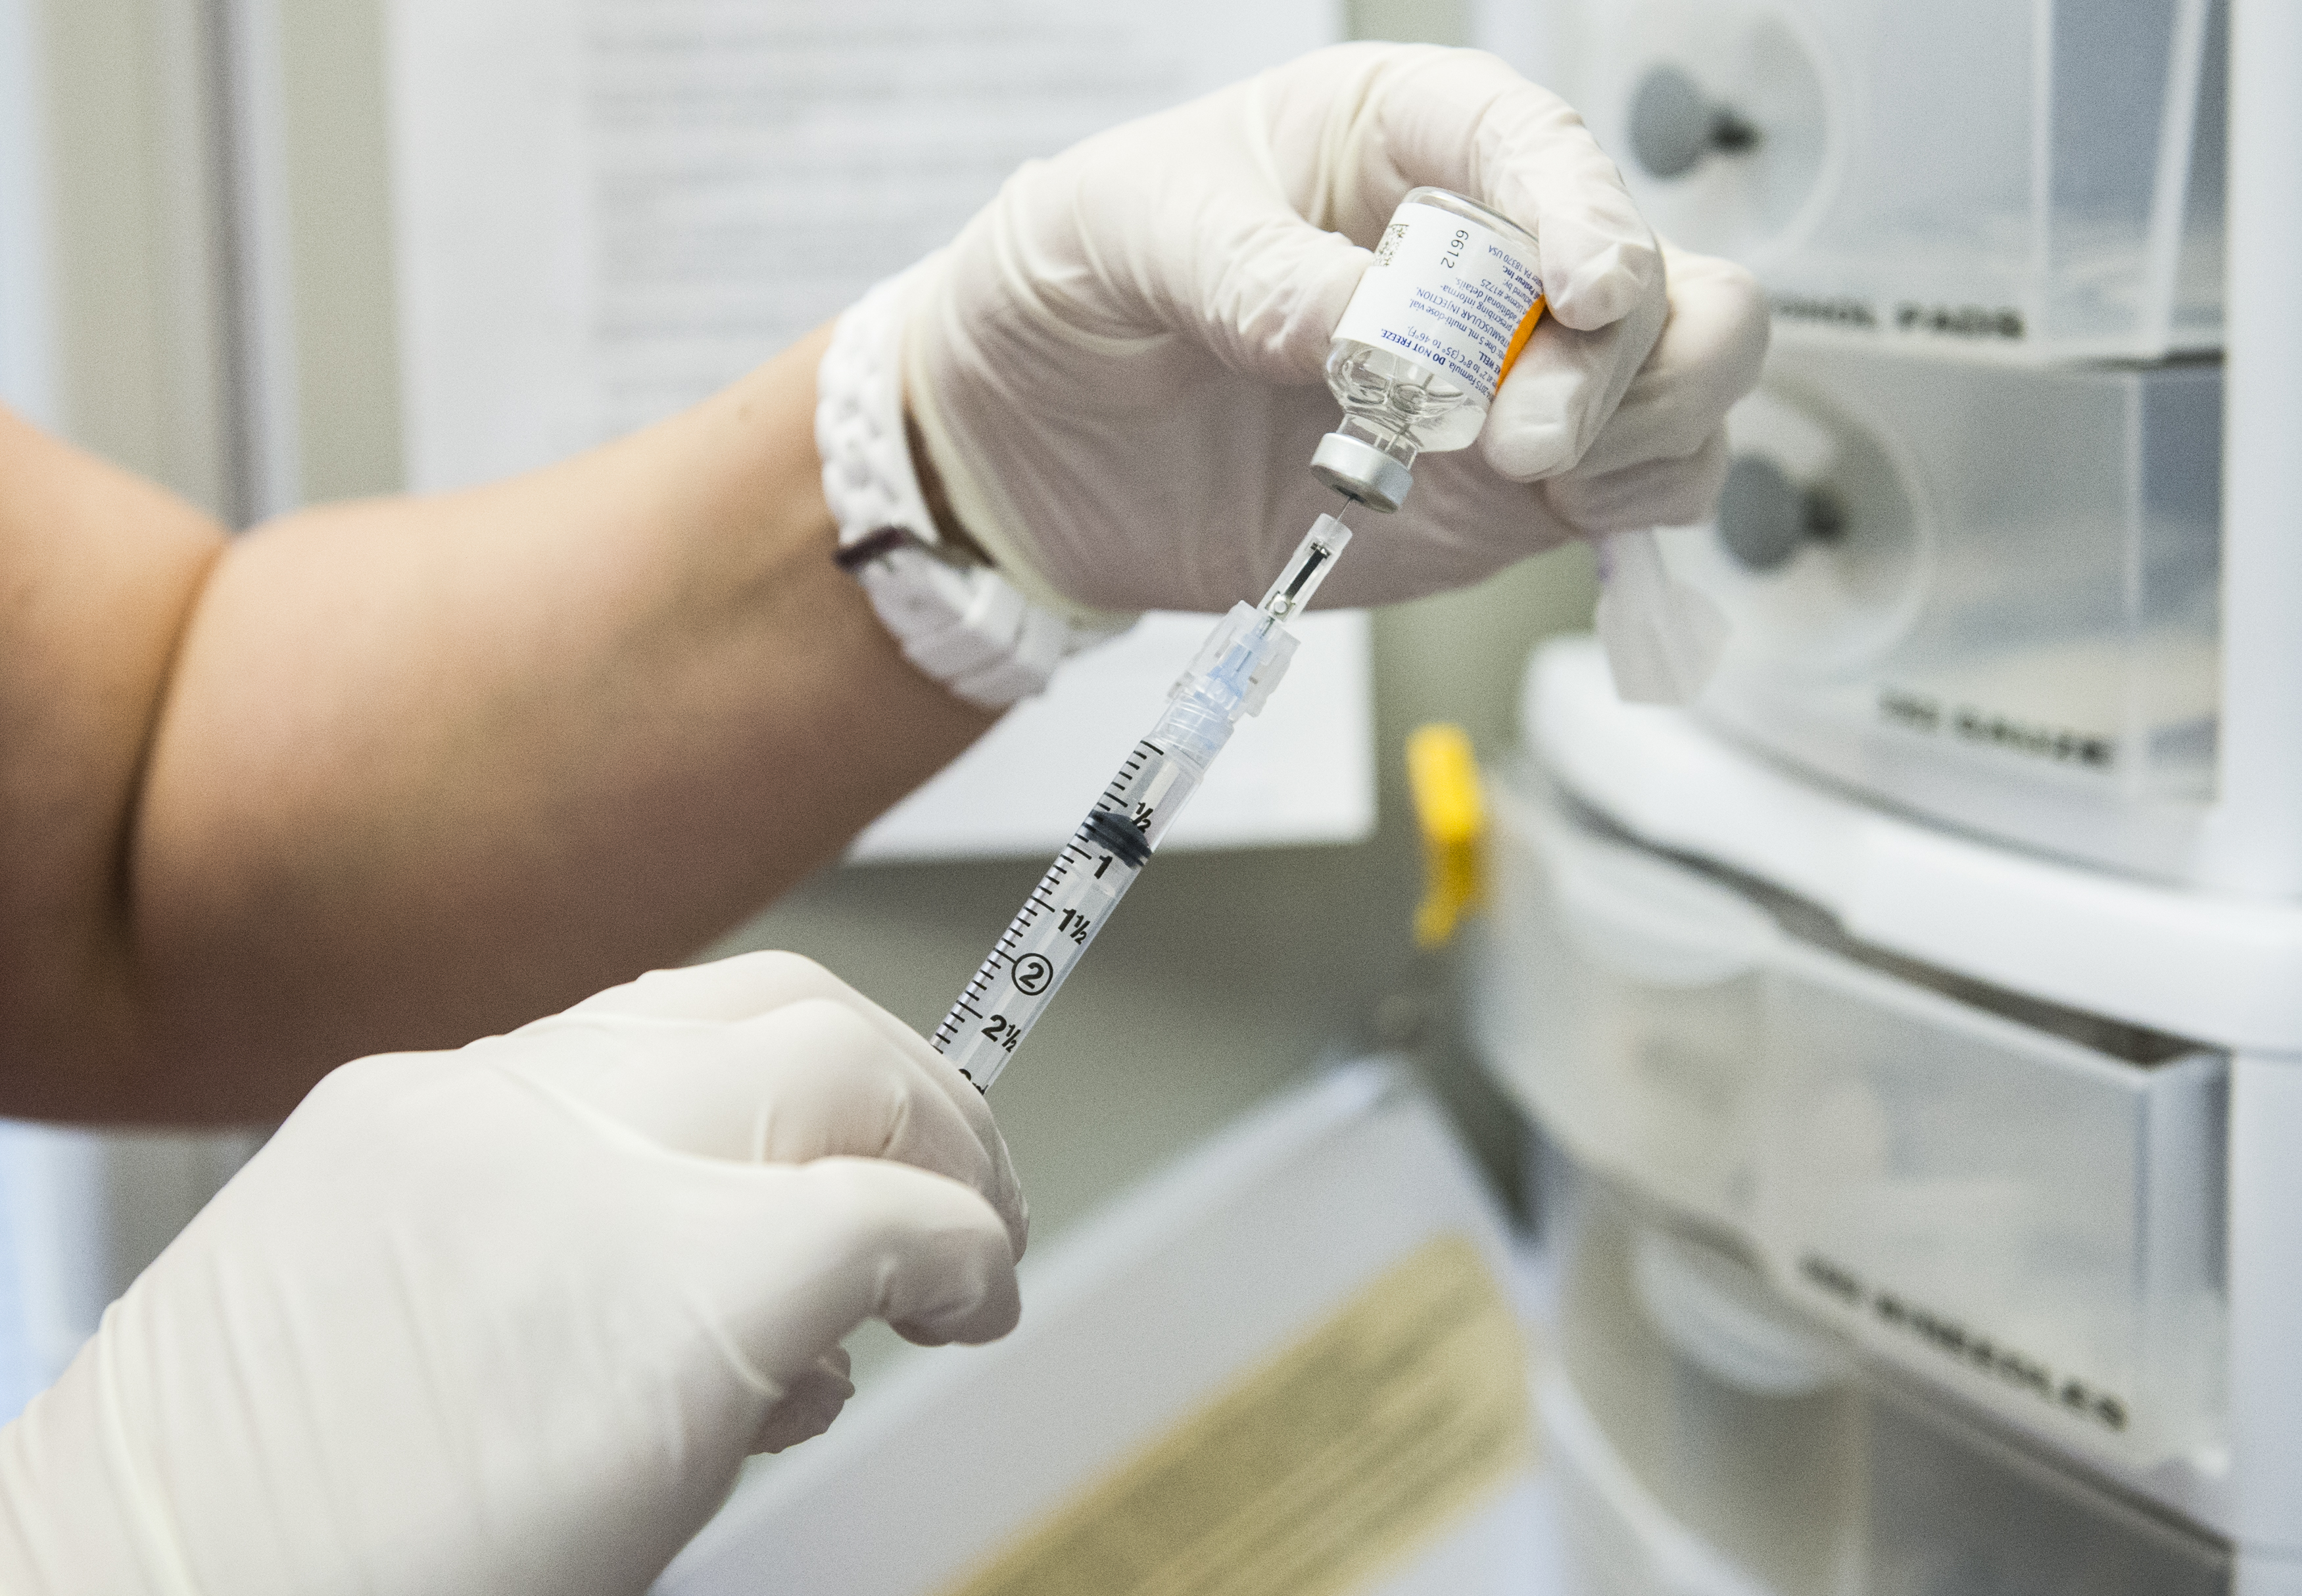 The flu vaccine is drawn from the vile into the needle at Crawford Kids Clinic in Aurora, Colorado. (Brent Lewis&amp; Denver Post via Getty Images)